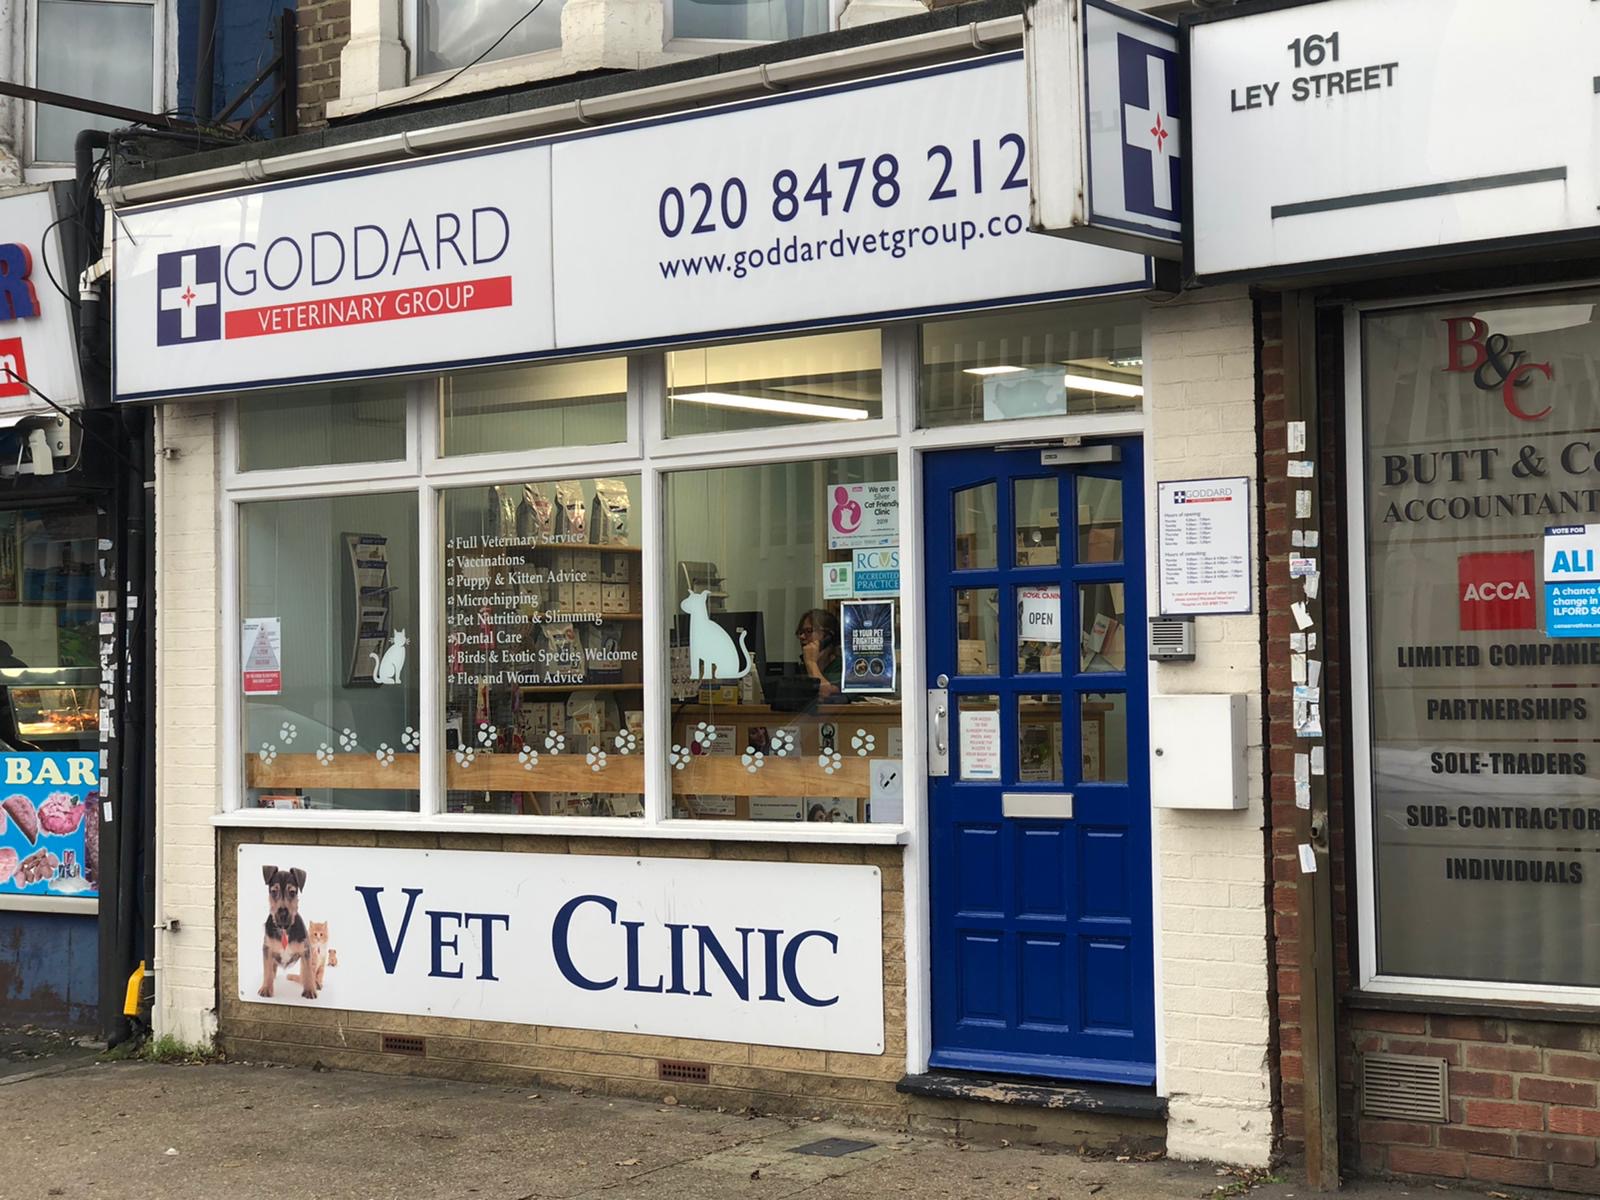 Images Goddard Veterinary Group, Ilford